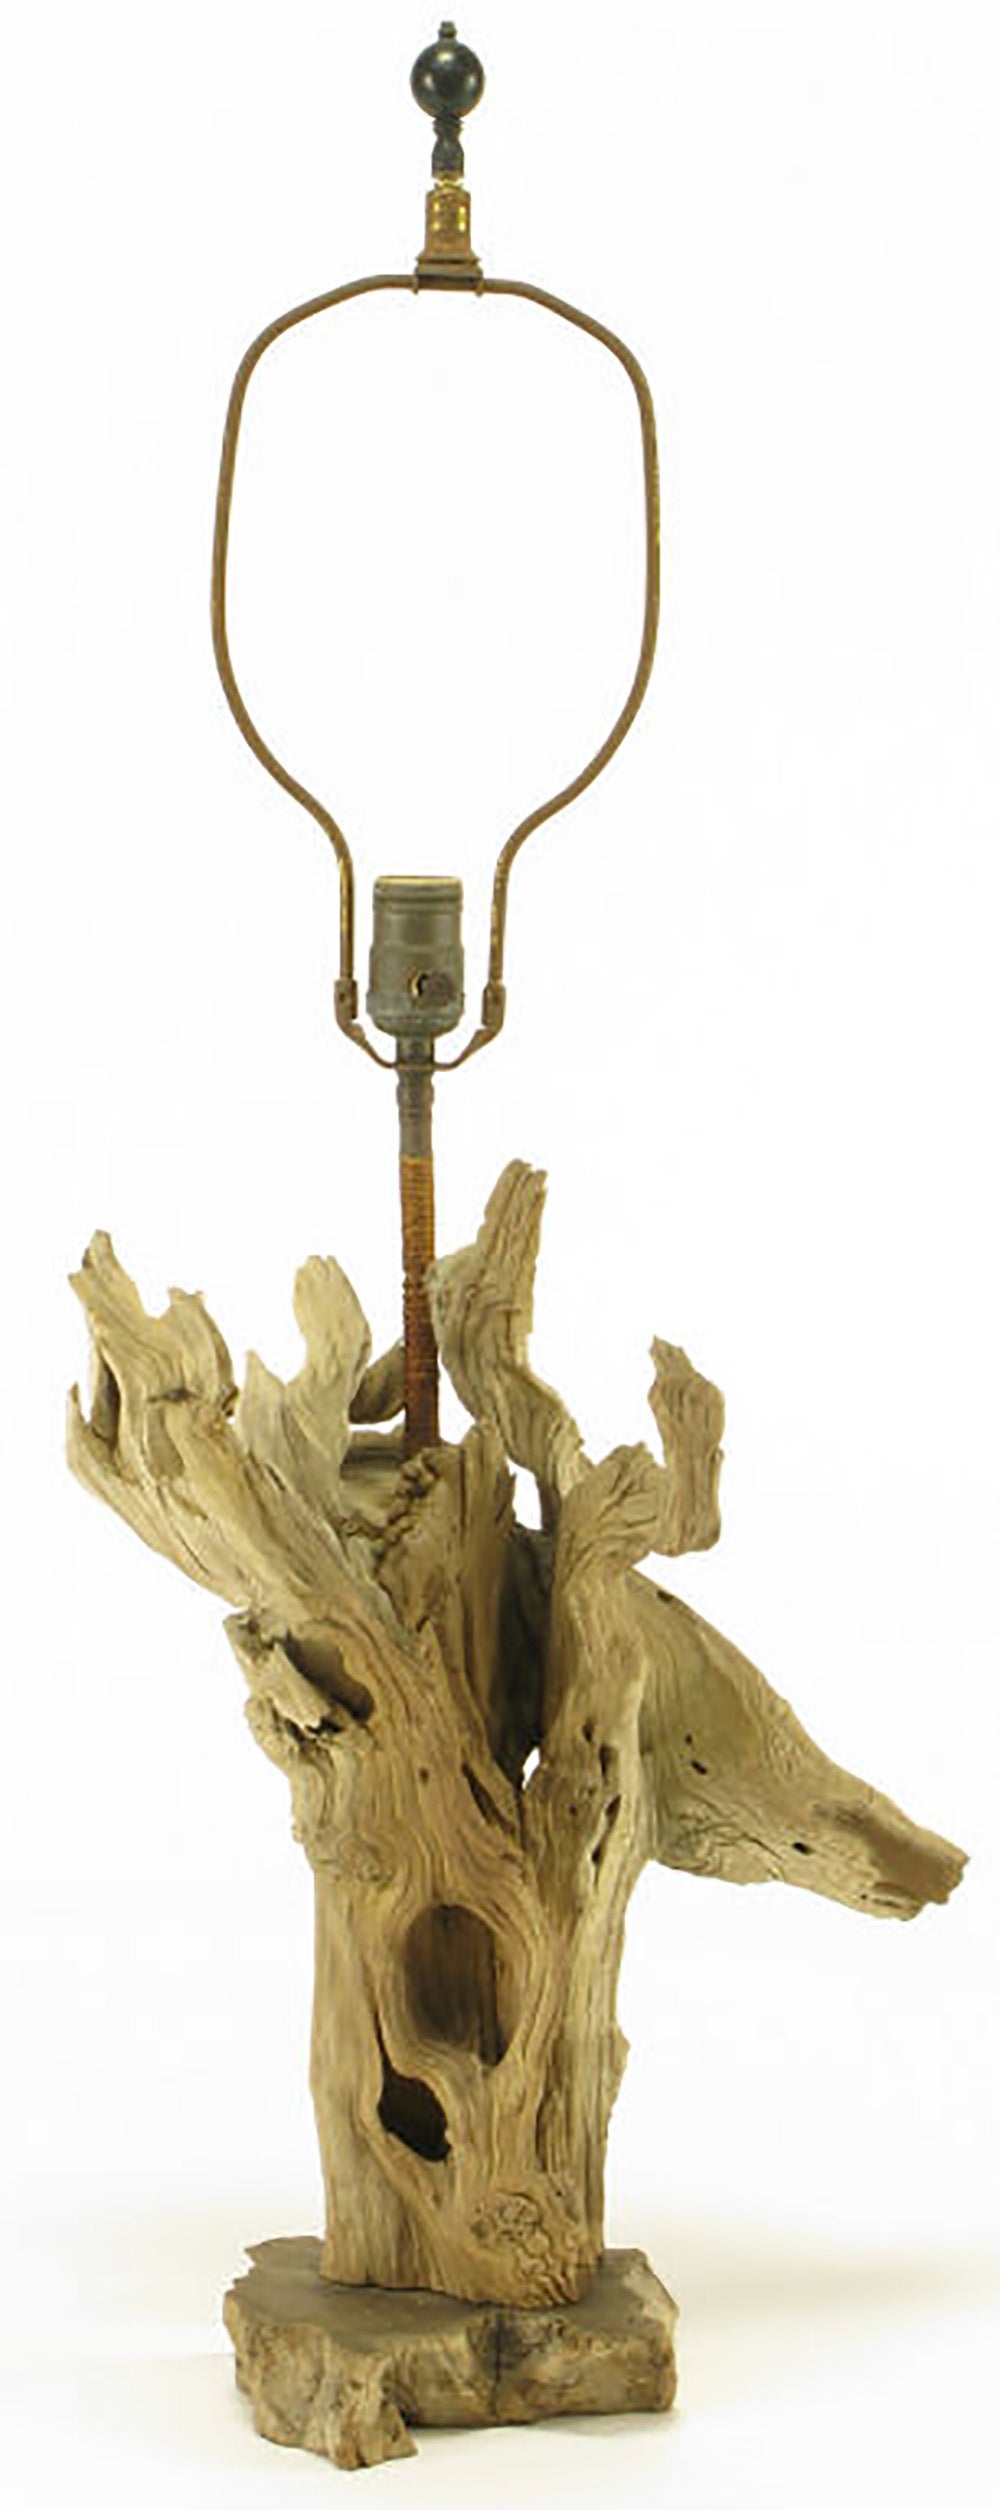 Driftwood table lamp with unexpected live edge carved wood base, circa 1960s. Rush wrapped long stem. Sold sans shade.